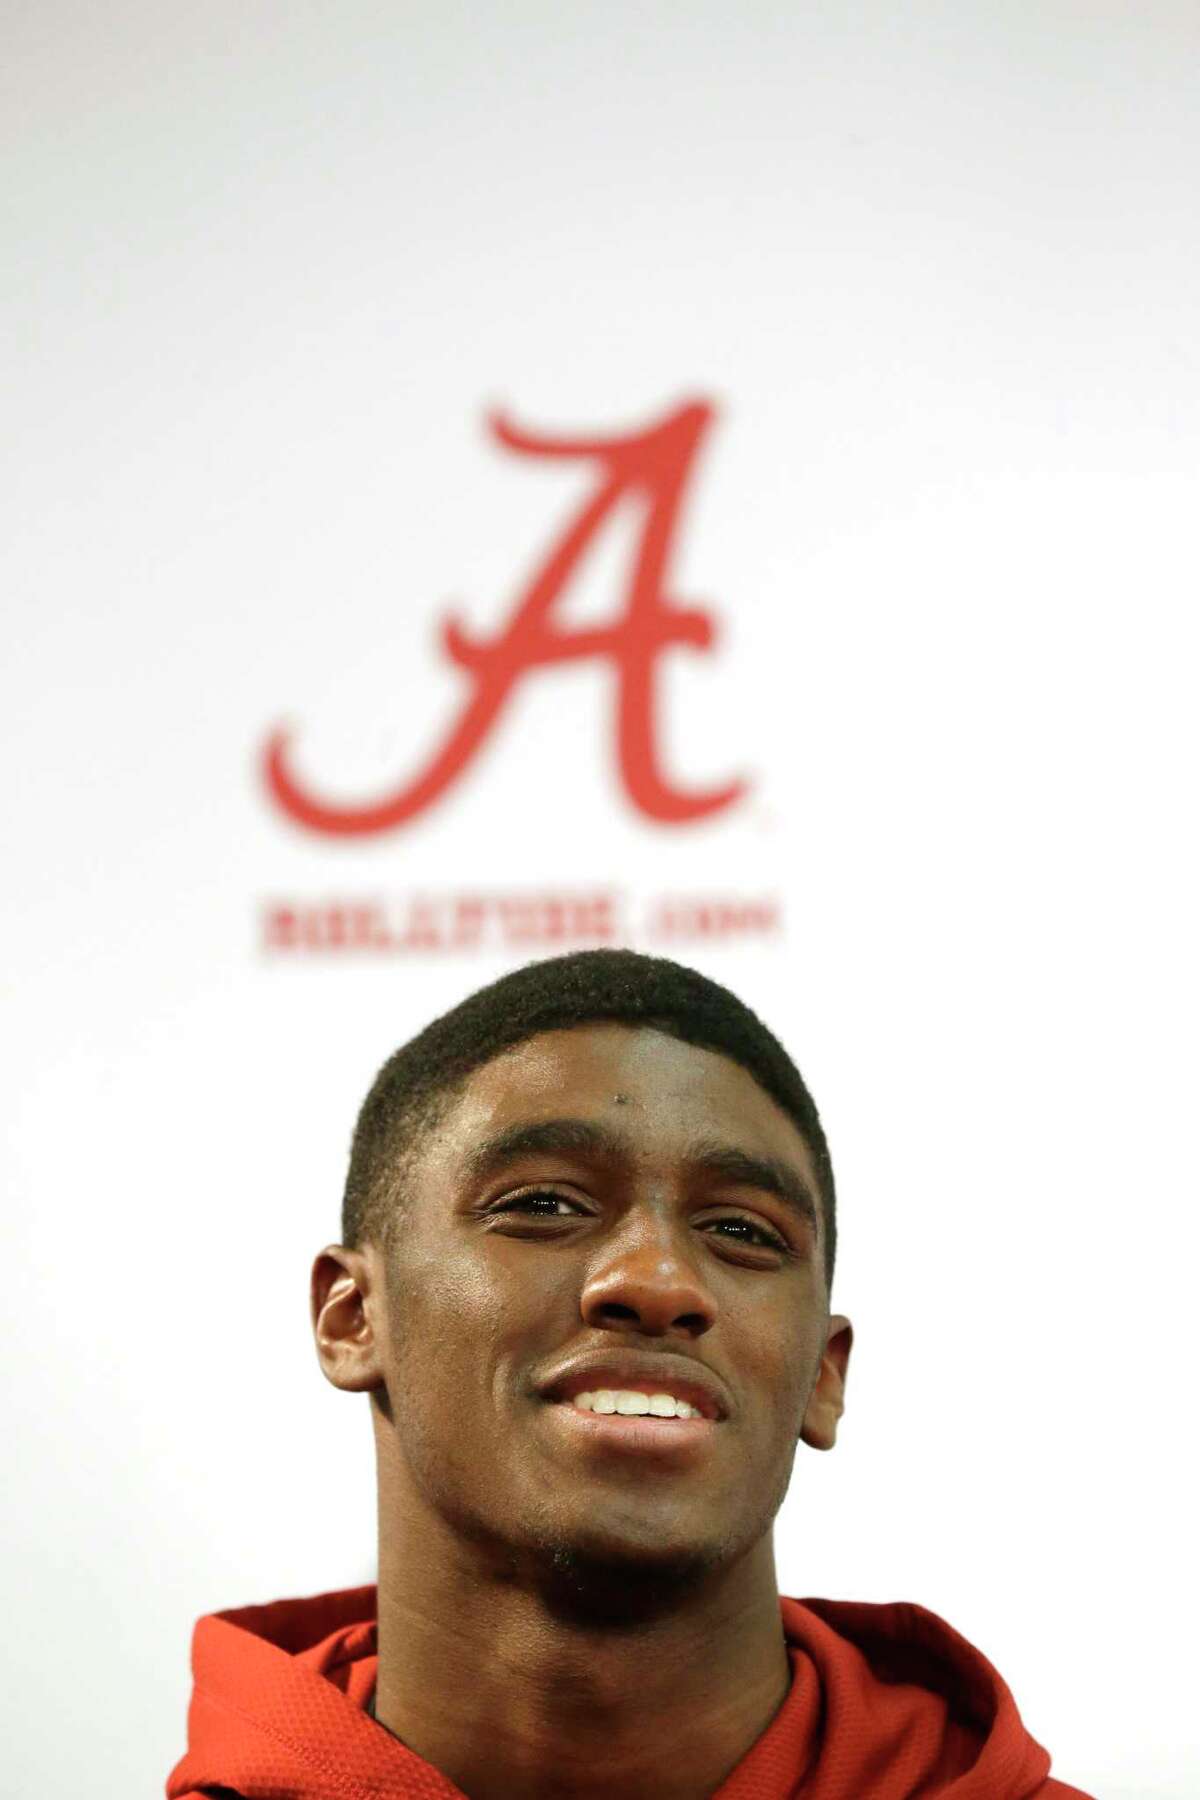 Alabama freshman safety Deionte Thompson speaks to the media duringan NCAA college football national signing day press conference, Wednesday, Feb. 4, 2015, in Tuscaloosa, Ala. (AP Photo/Brynn Anderson)